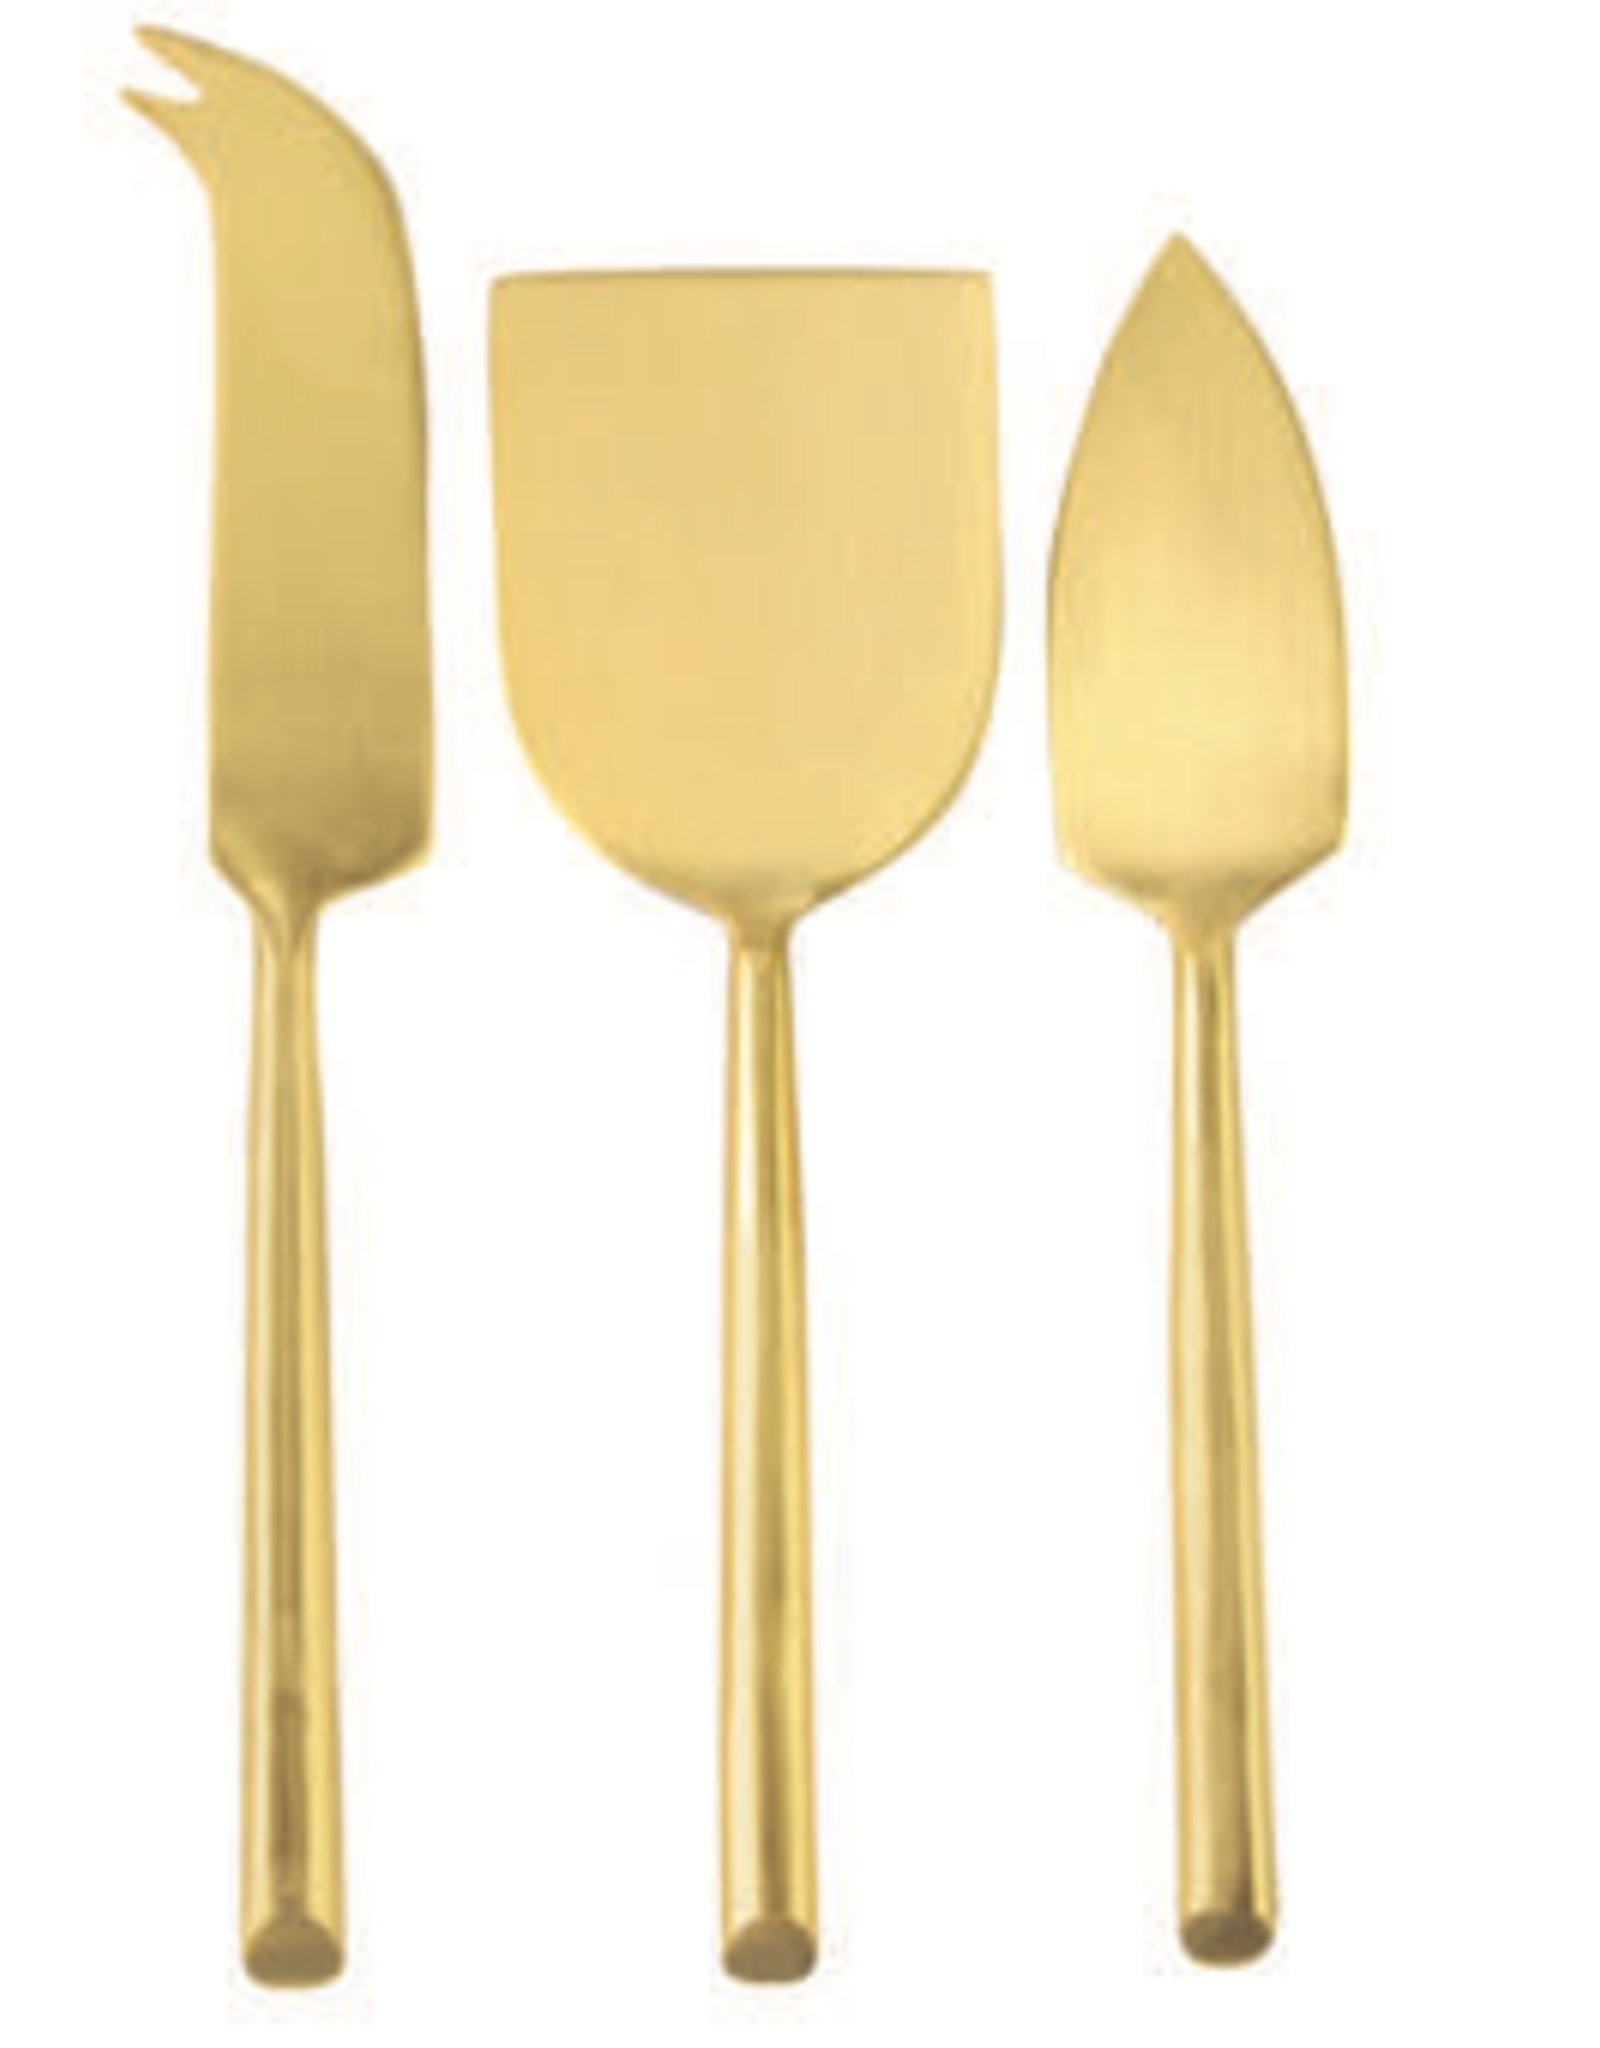 Cheese Knives, Matte Gold, Set of 3